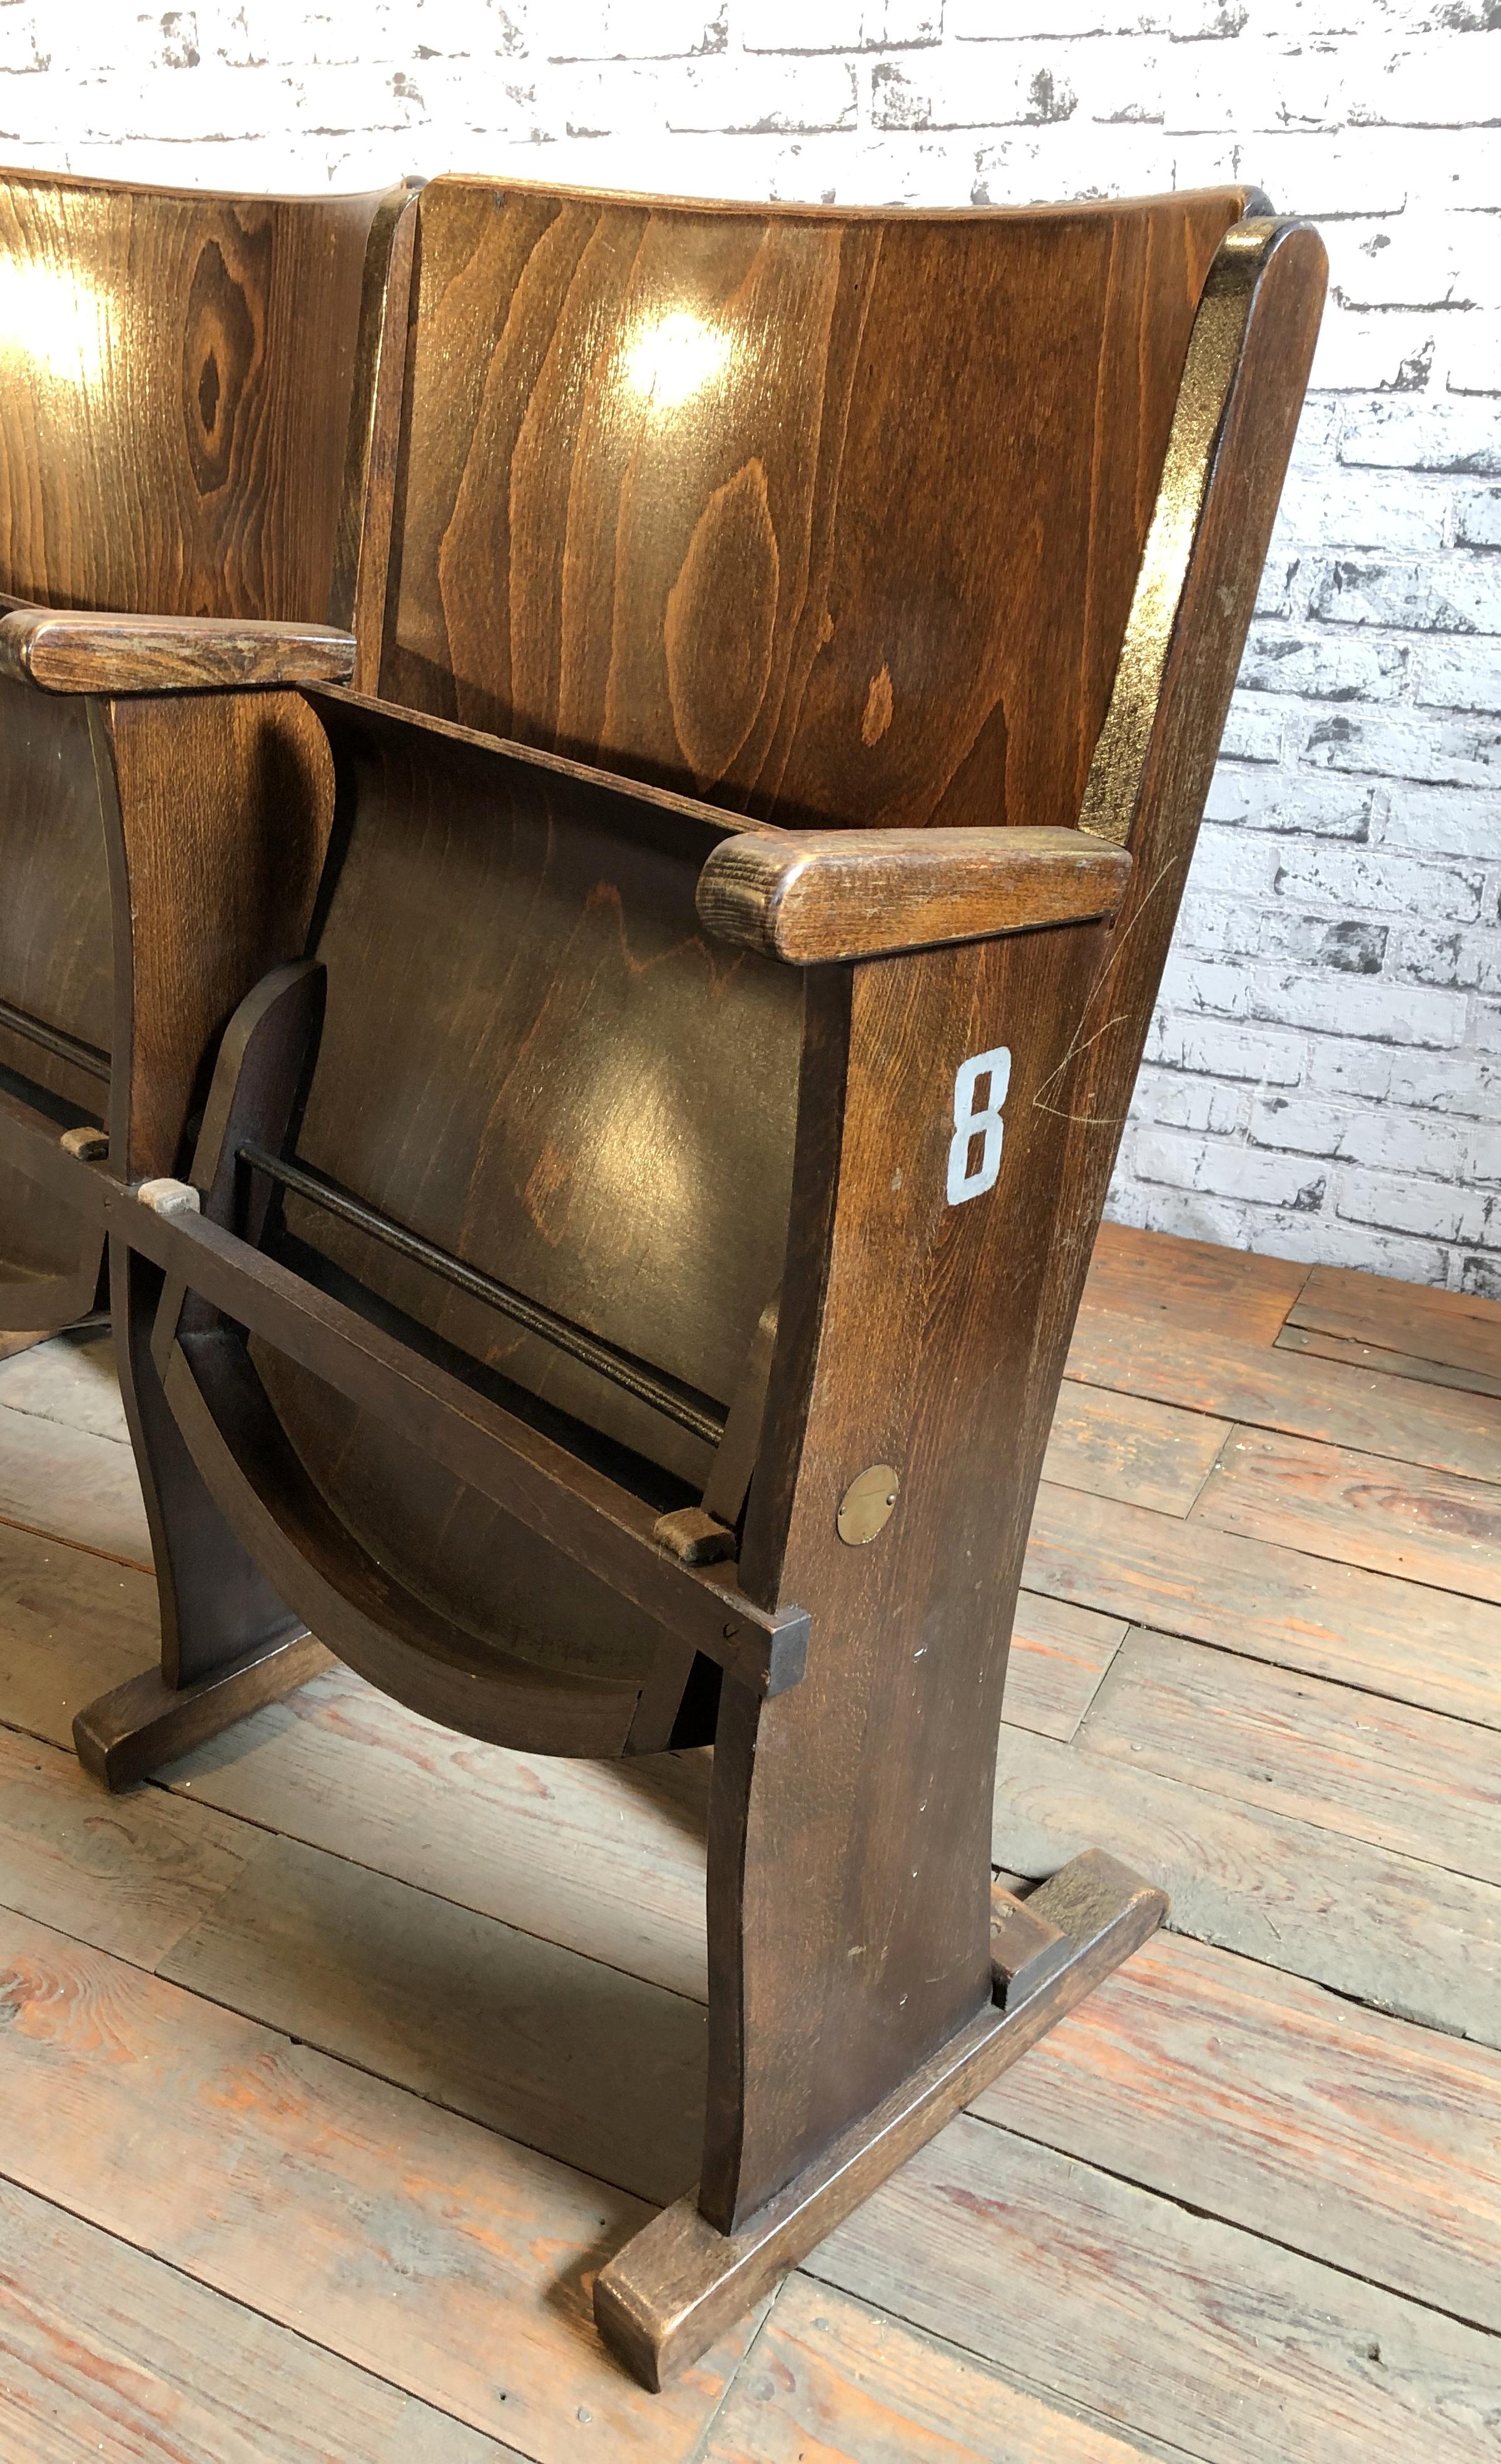 This four-seat cinema bench was produced by Ton (former Thonet) in Czechoslovakia during the 1950s. The chairs are stabile and can be placed anywhere. It is completely made of wood (partly solid wood, partly plywood). The seats fold upwards. The